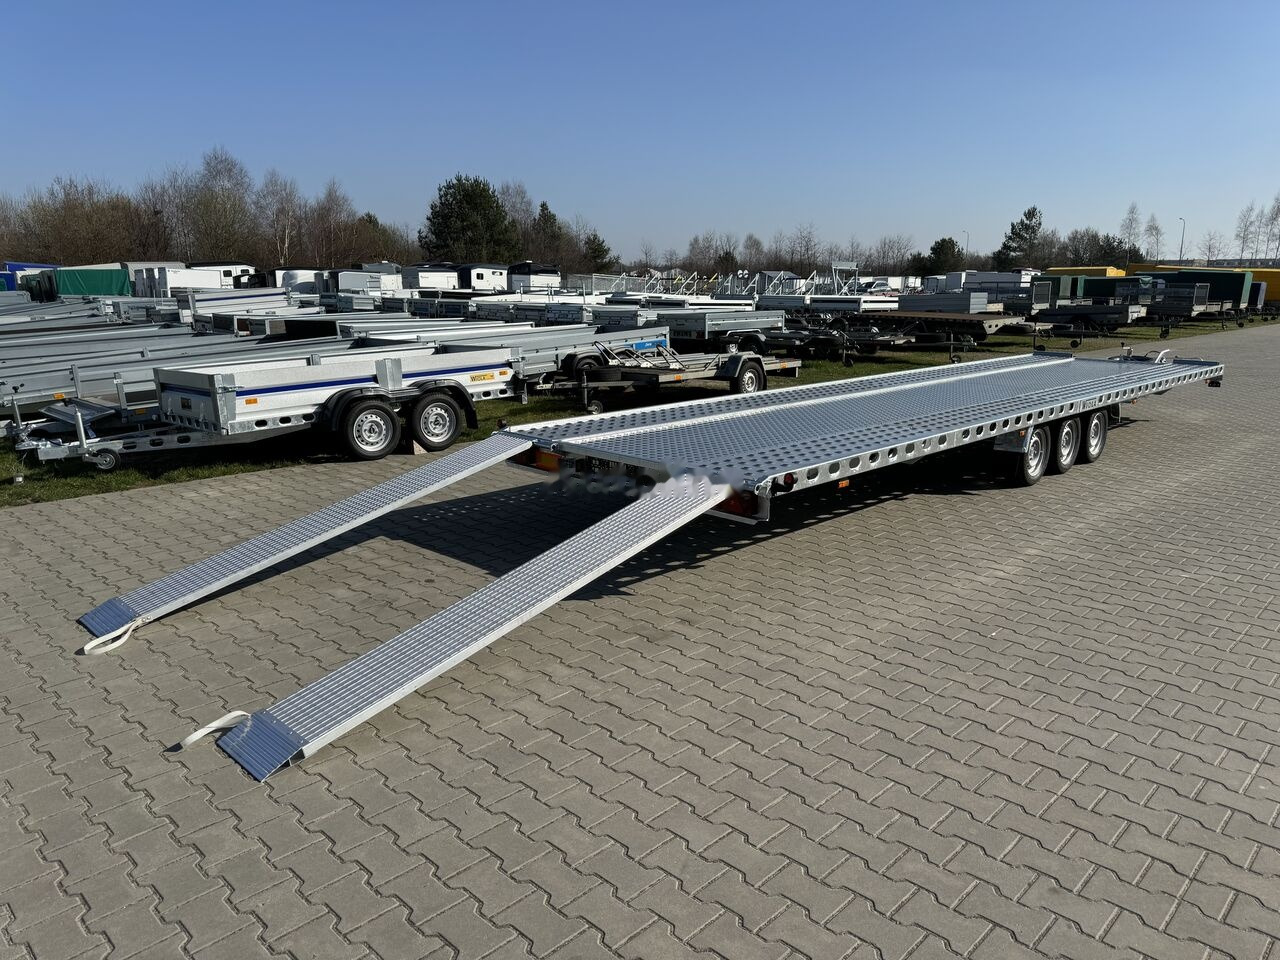 Remorque porte-voitures neuf Wiola L35G85 8.5m long trailer with 3 axles for transport of 2 cars: photos 23